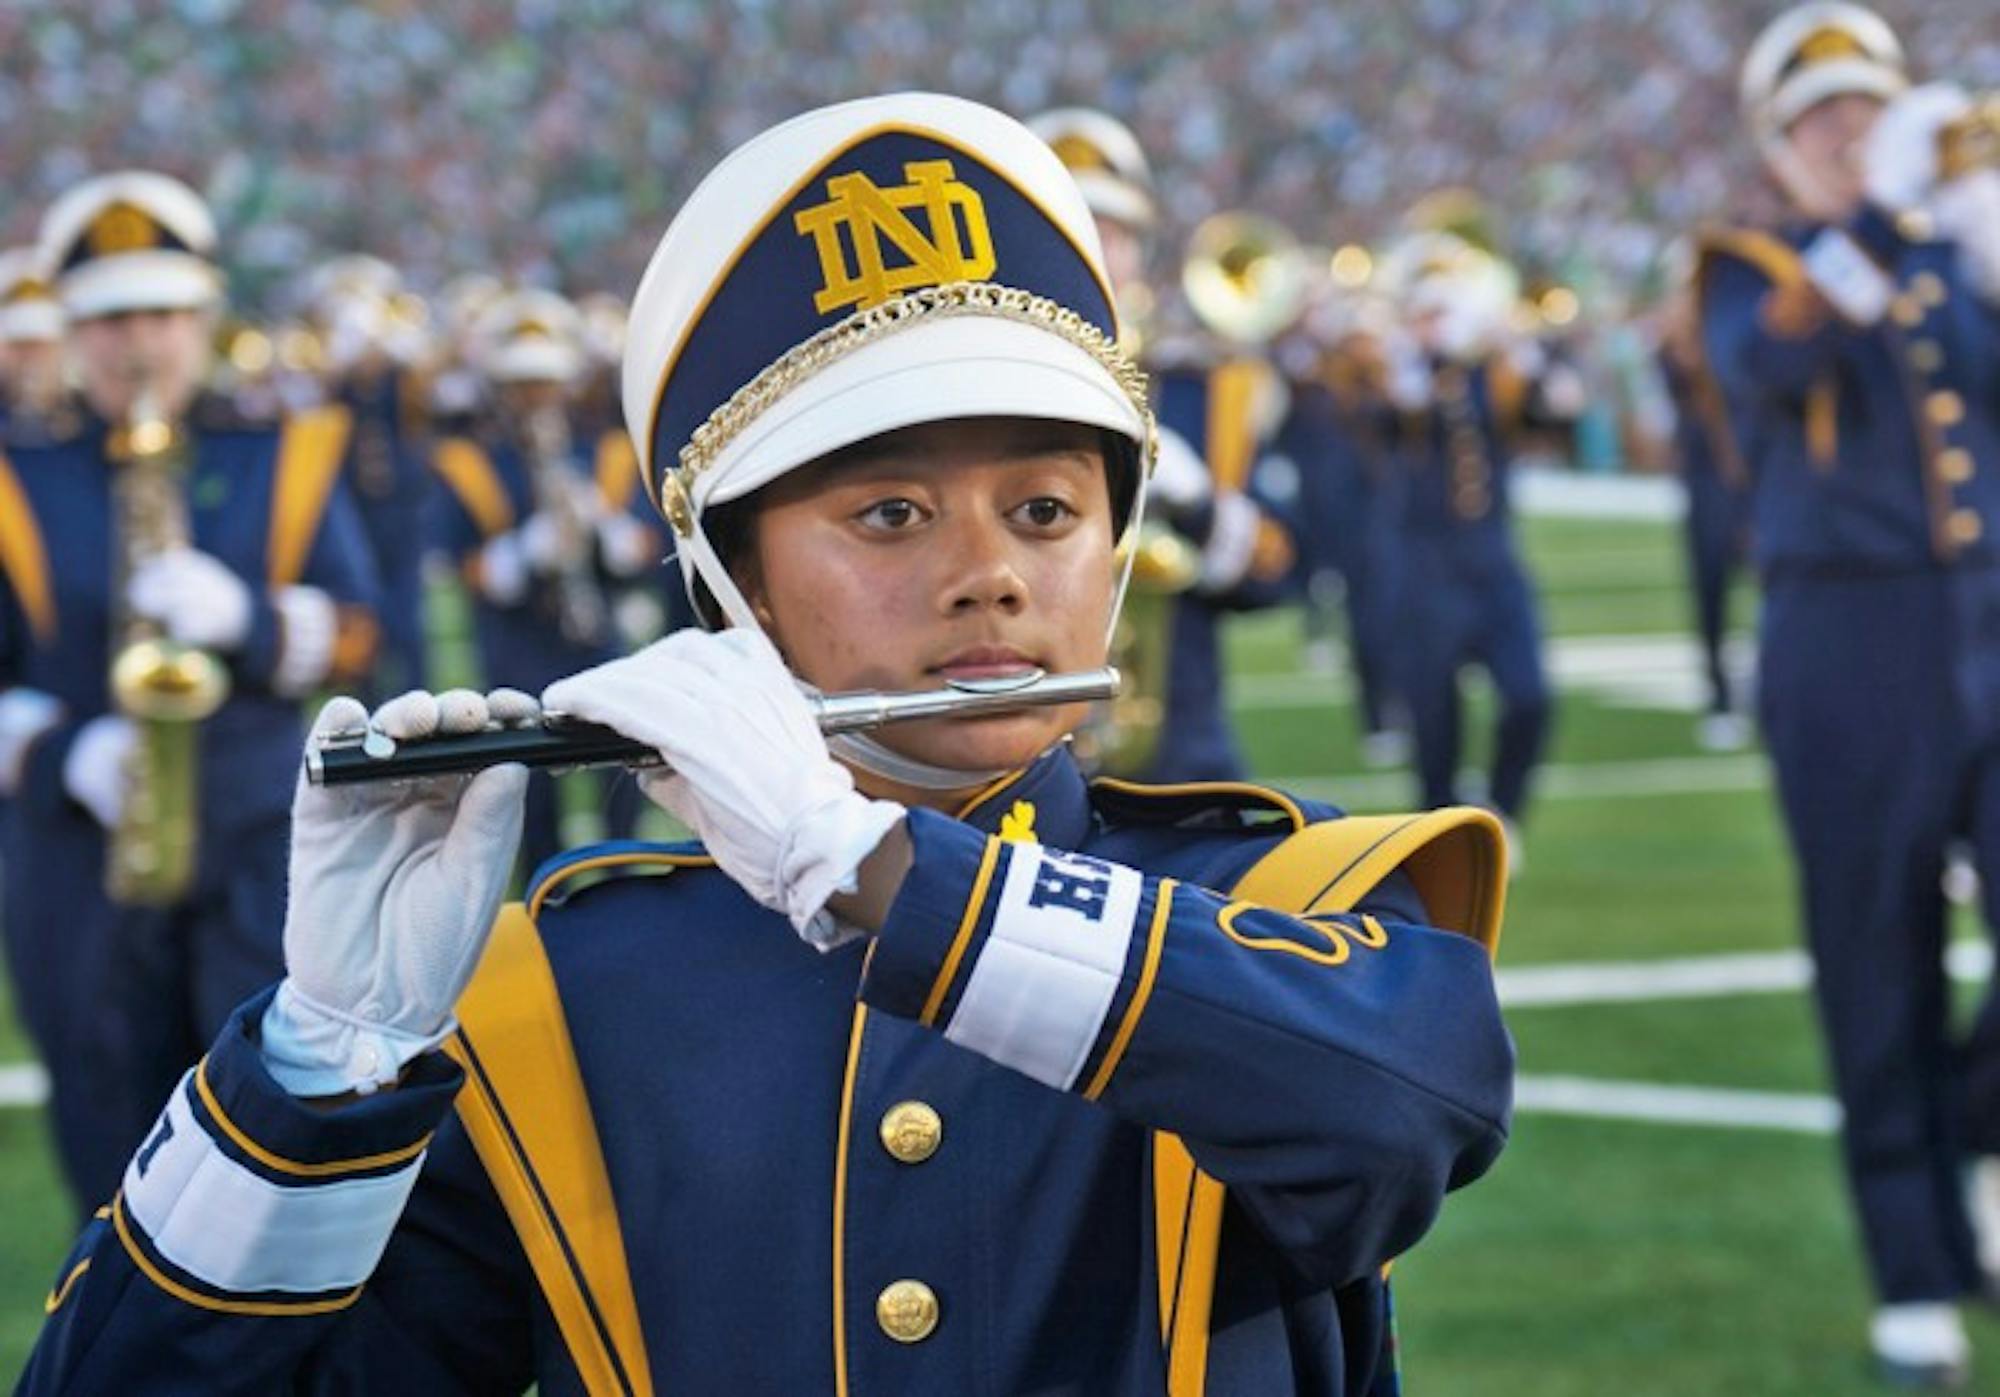 Senior Kim Forbes marches onto the field at Notre Dame Stadium. The band will relocate for the 2017 season, moving from an on-field location in the northeast corner of the stadium to the front of the student section.